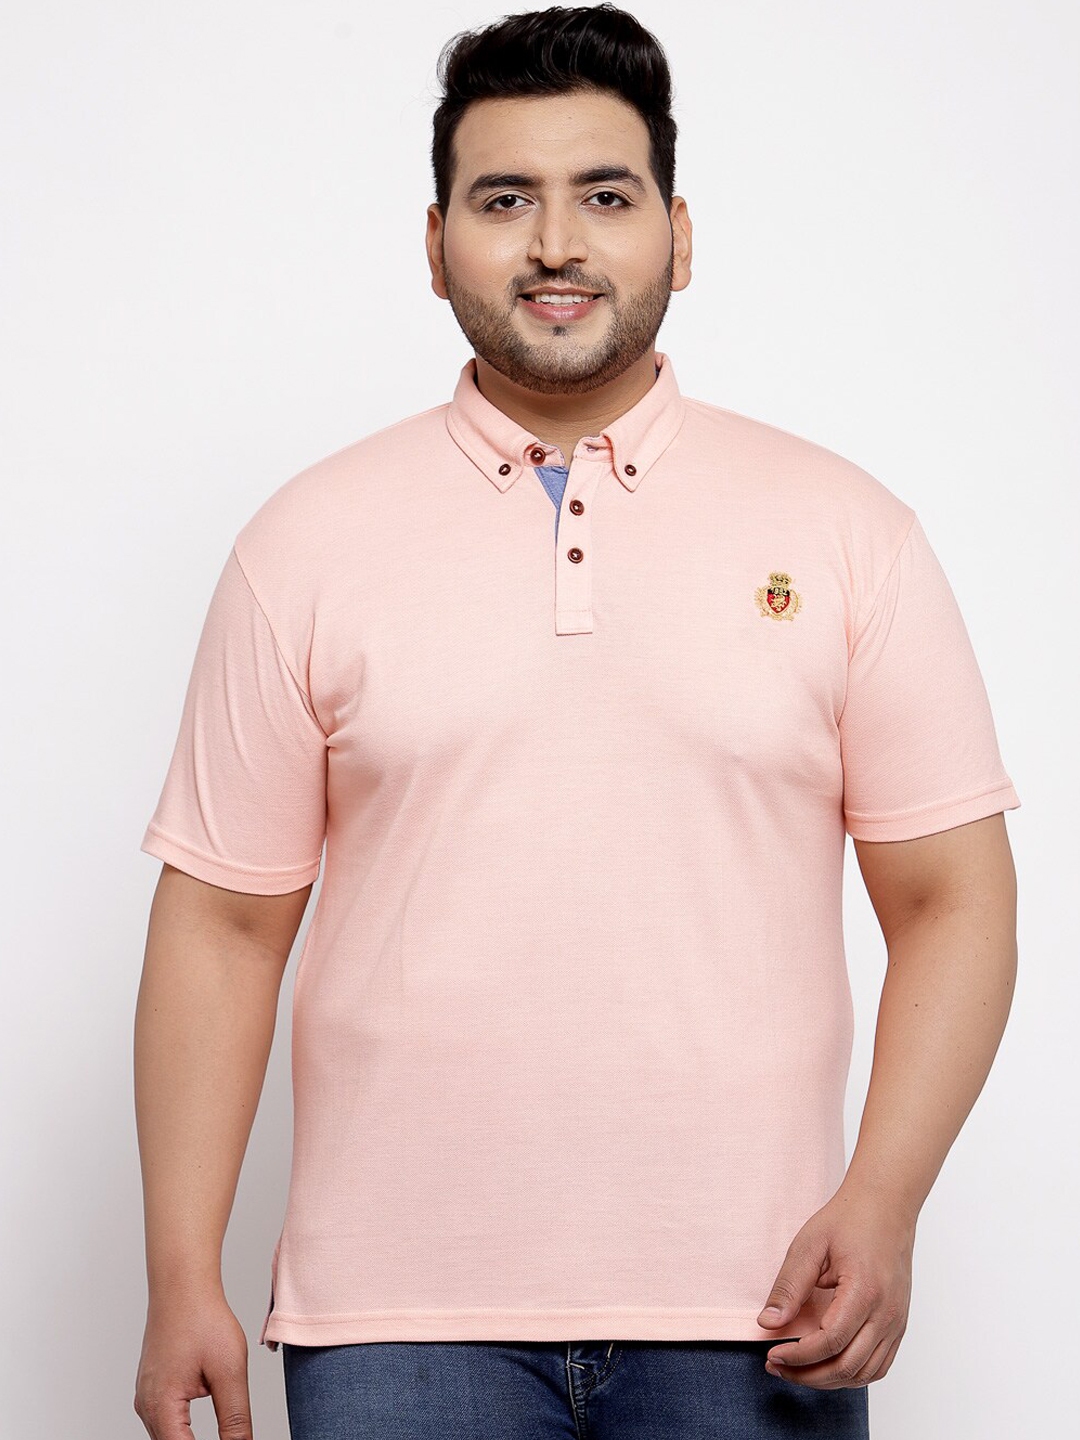 Buy PlusS Men Plus Size Pink Solid Henley Neck T Shirt Tshirts For